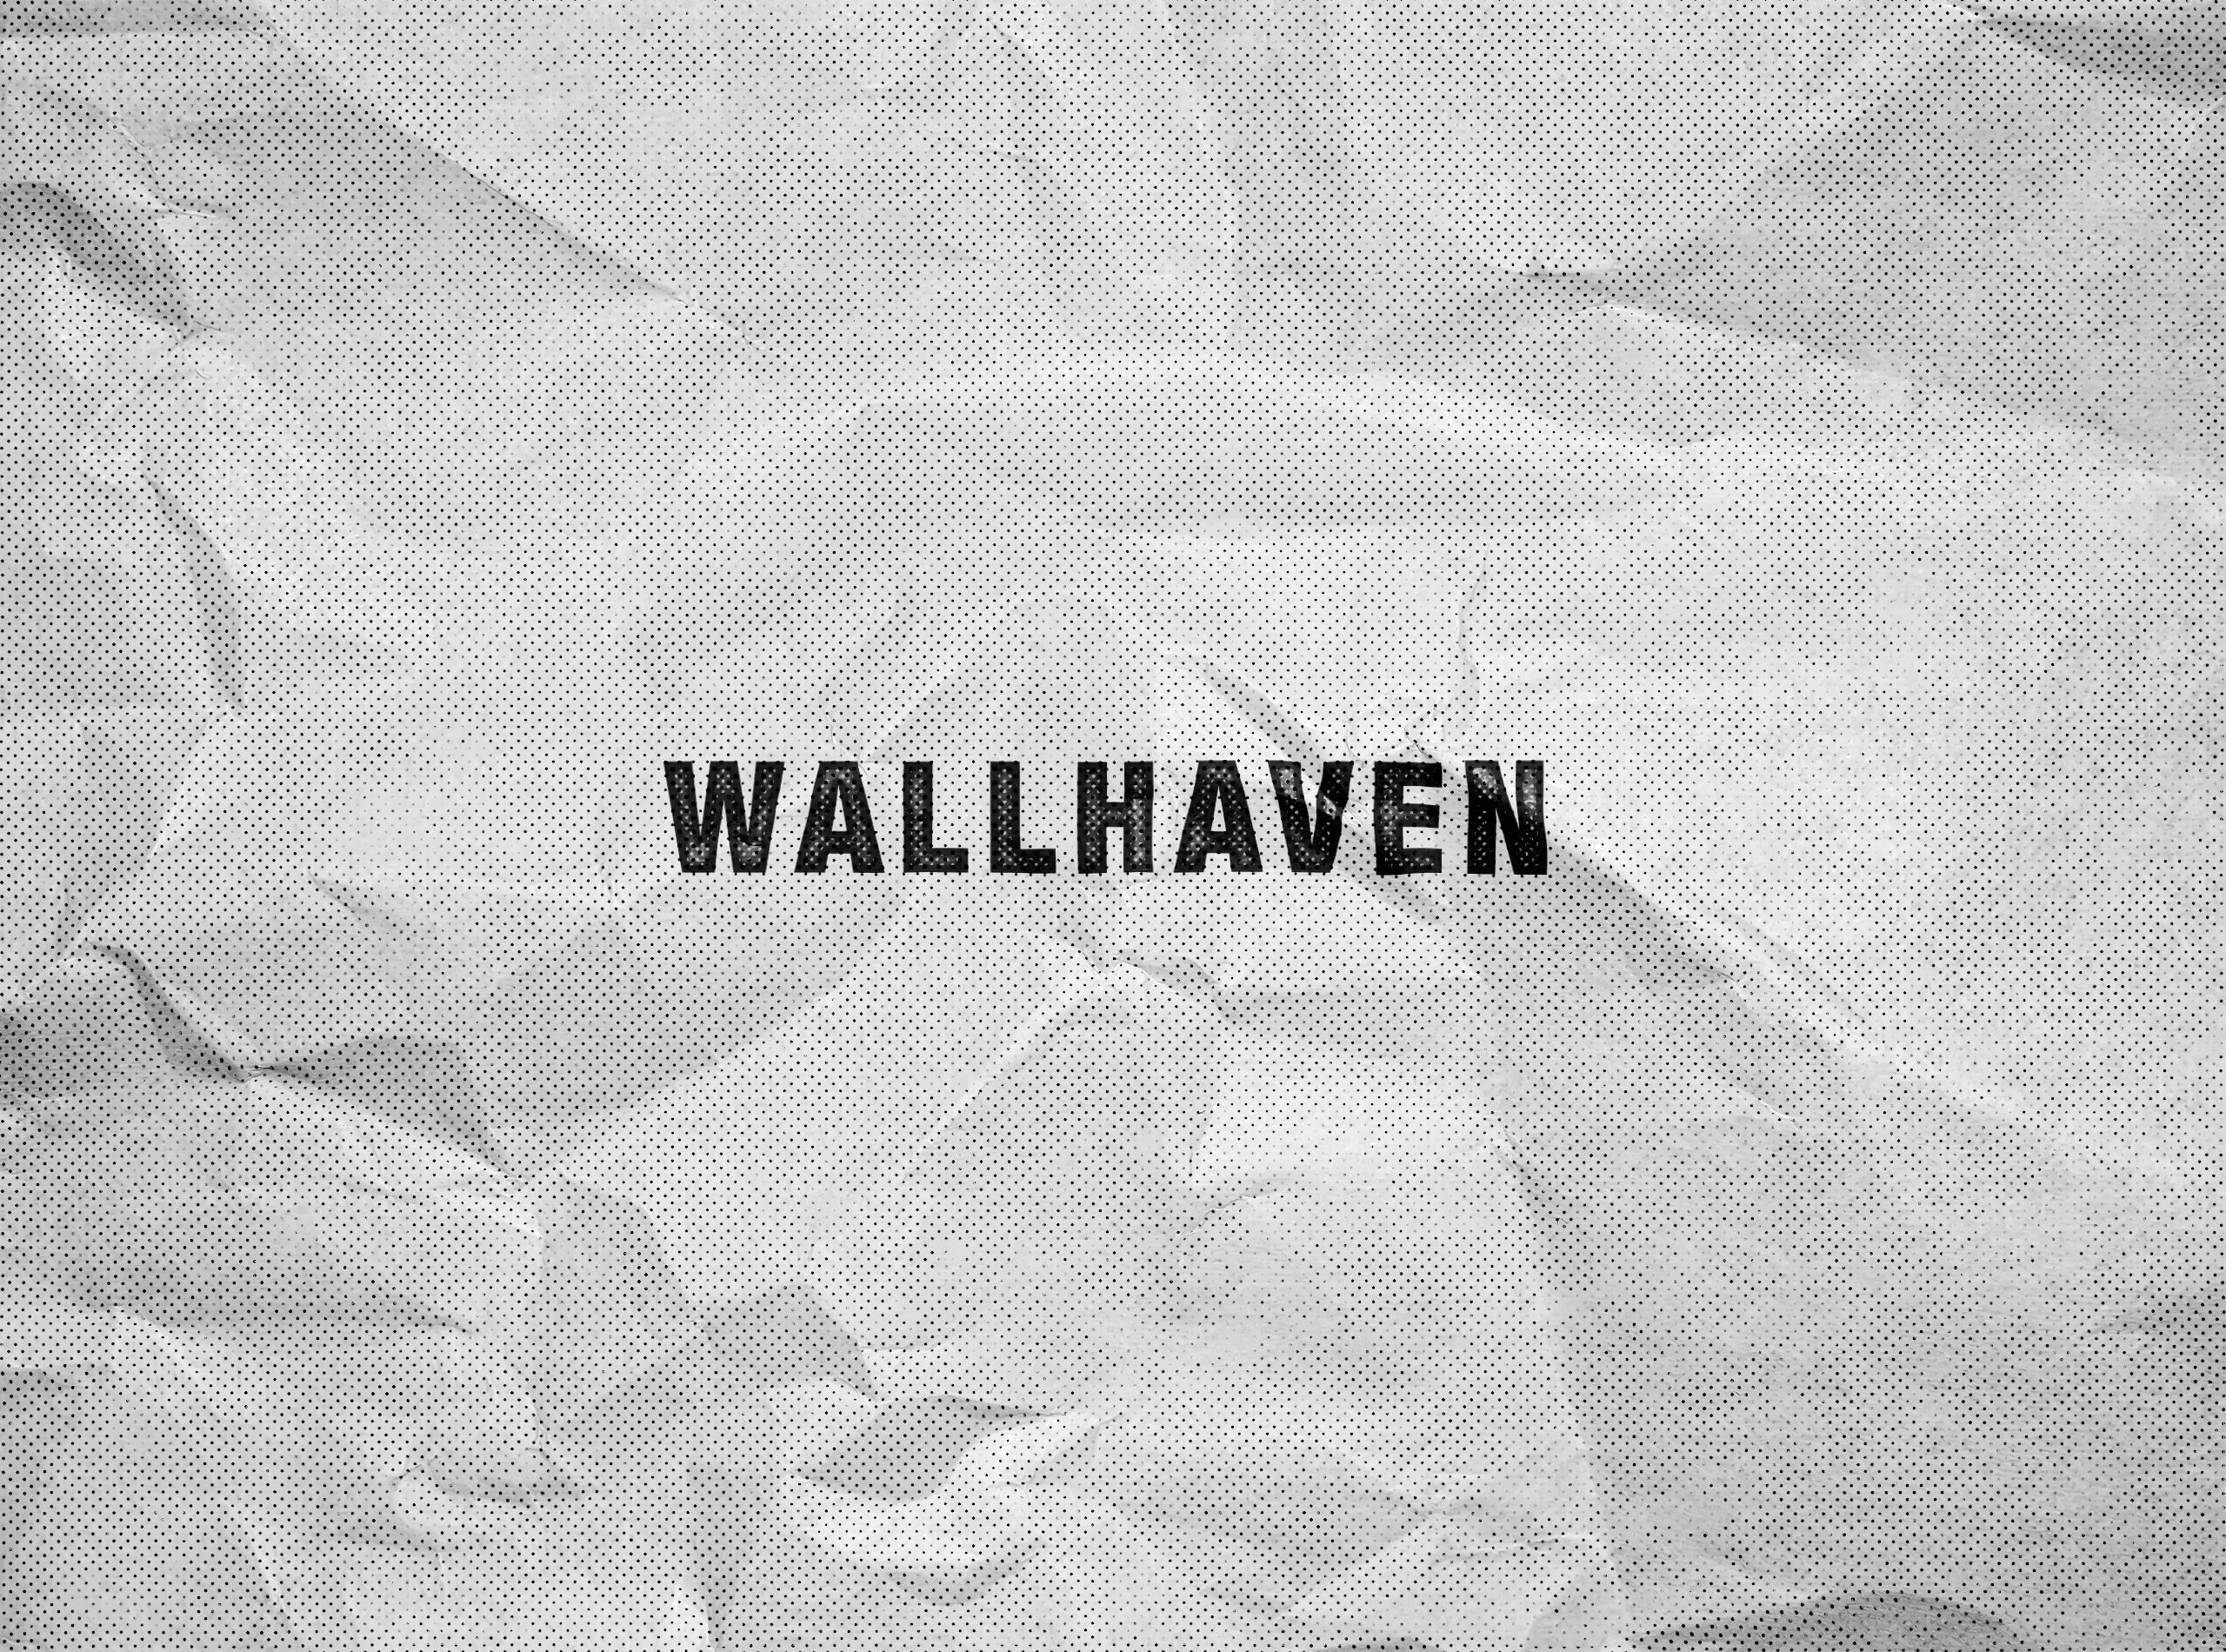 Halftone Pattern, paper, Simple, Wallhaven